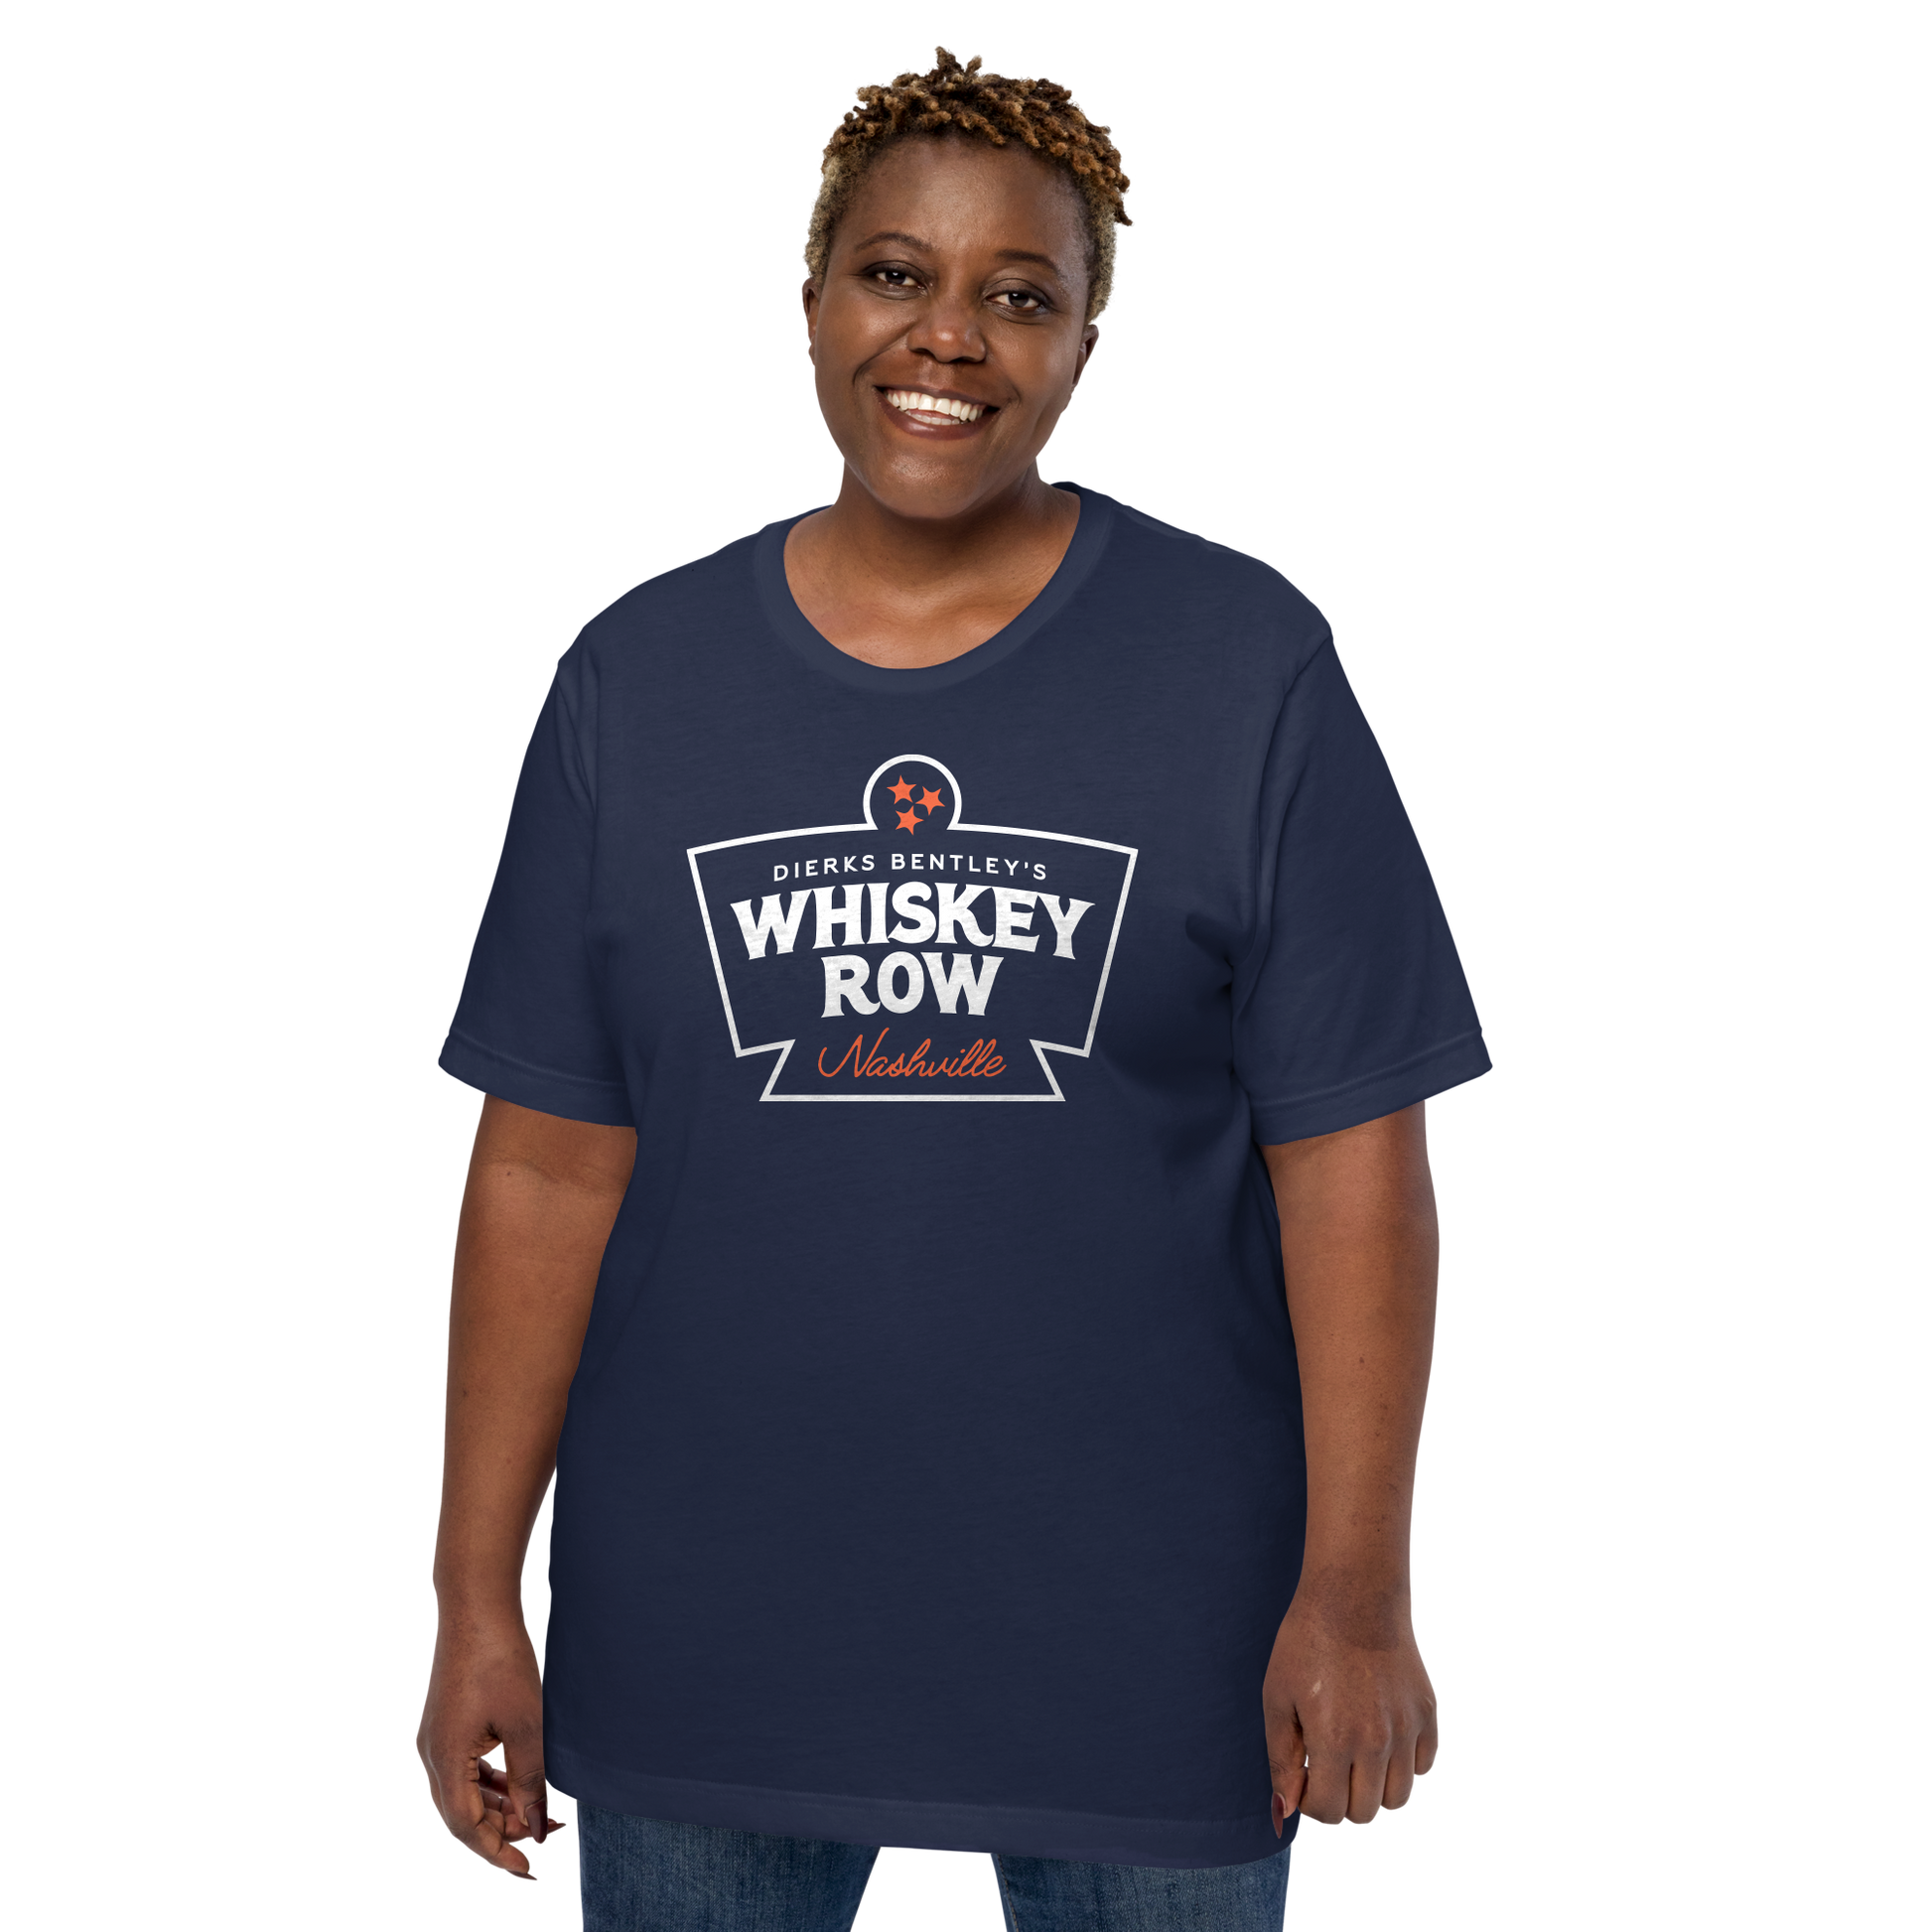 lady wearing Thunderbird Nashville Navy Tee, inspired by Dierks Bentley’s Whiskey Row